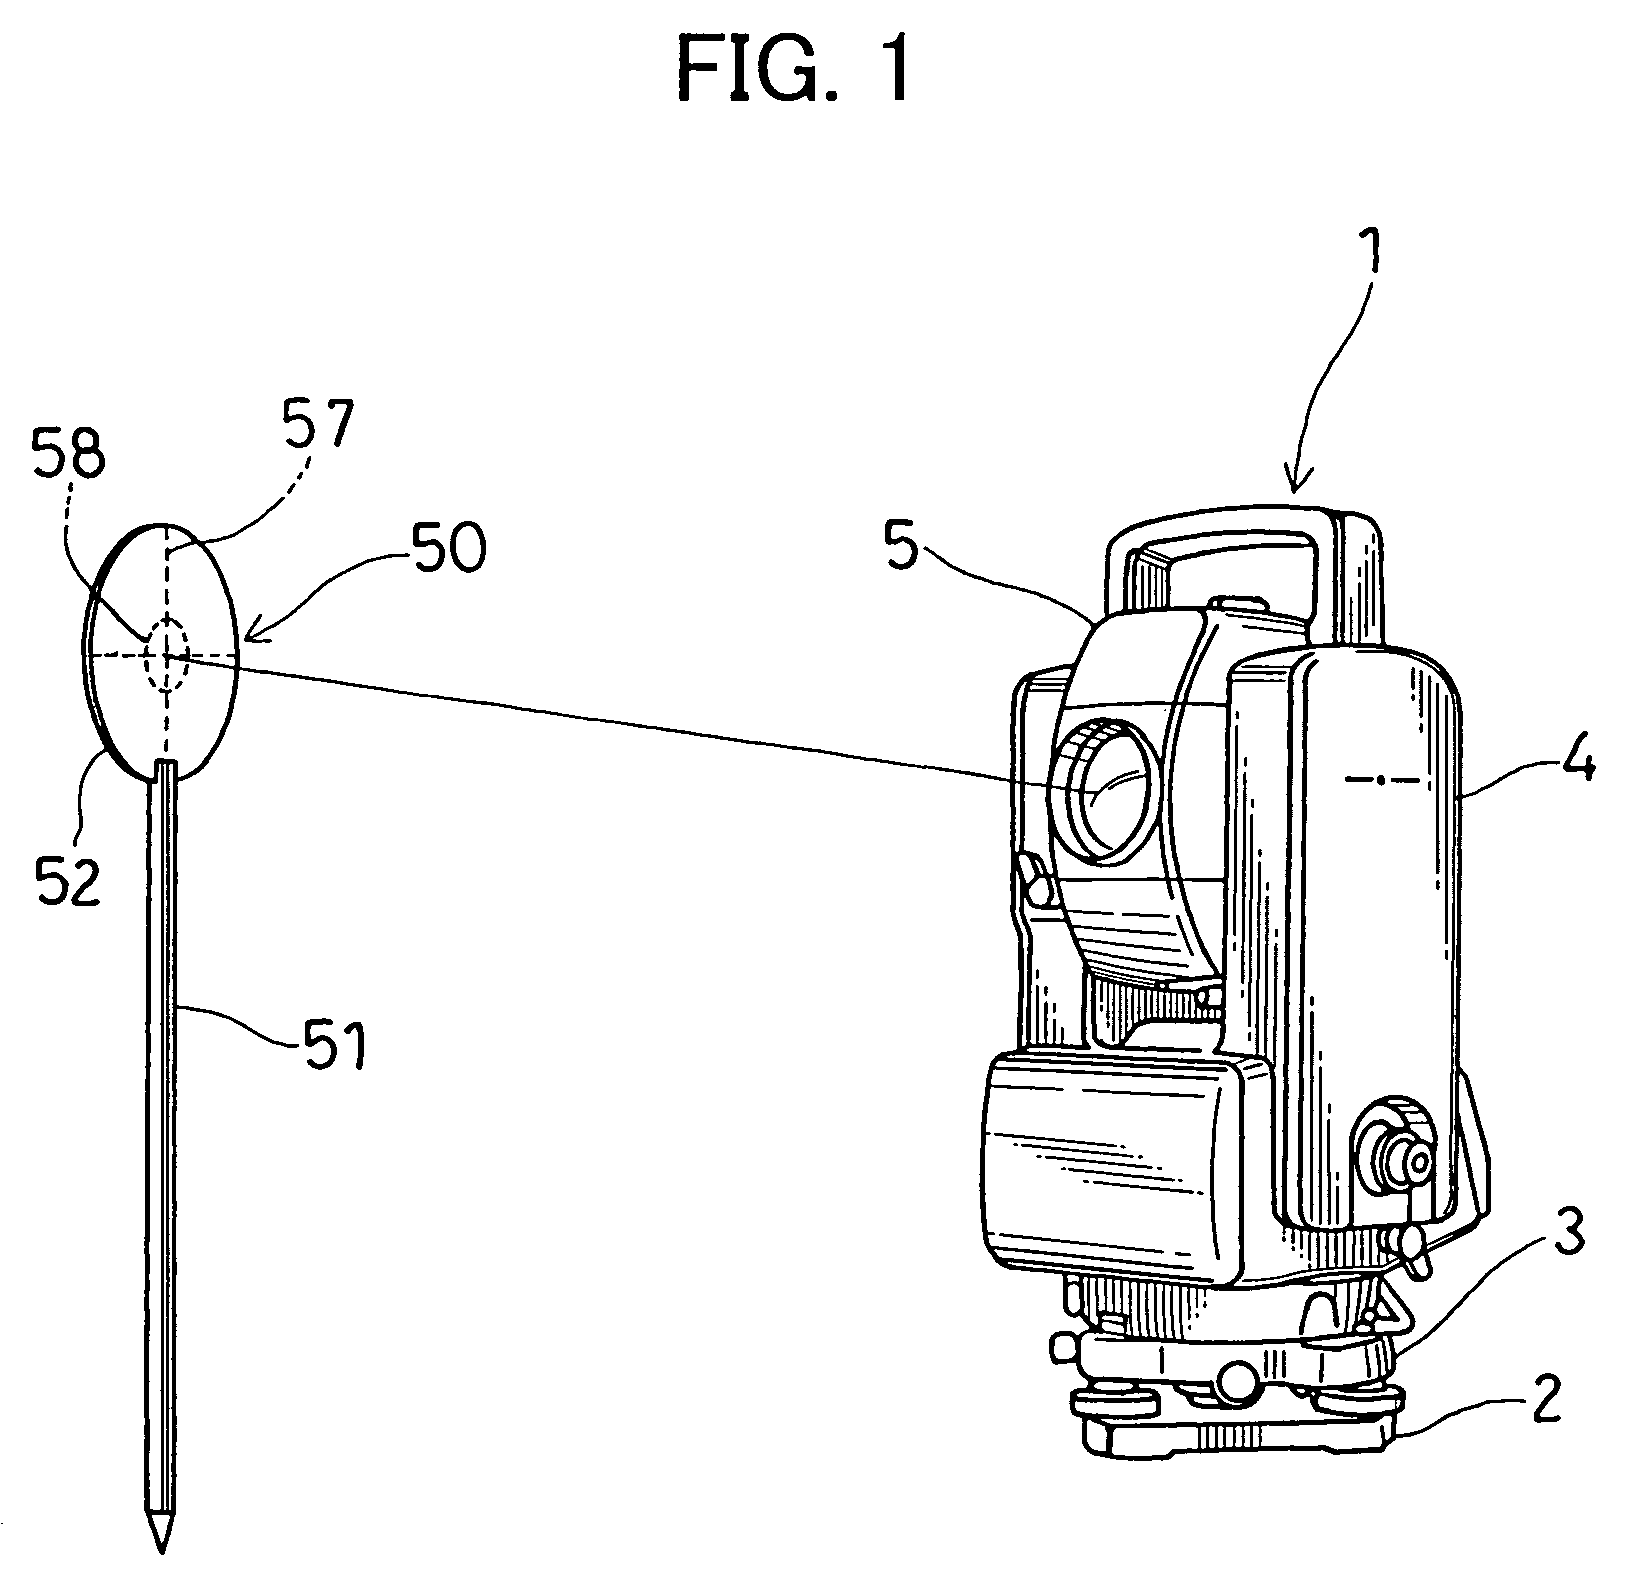 Target for surveying instrument